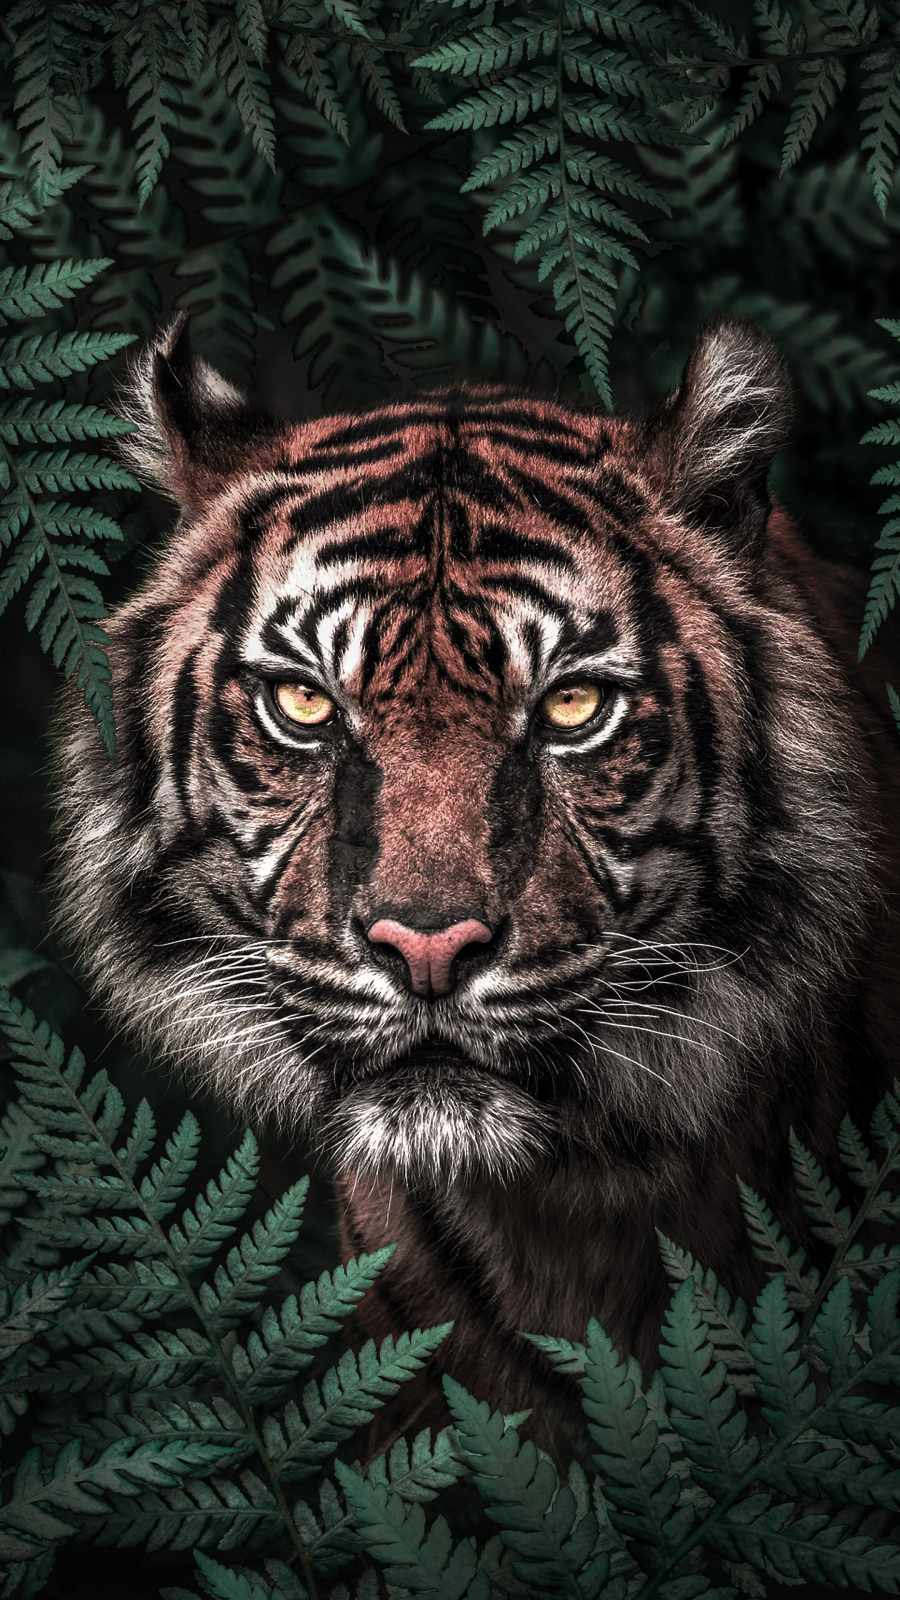 Tiger In Forest IPhone Wallpaper - IPhone Wallpapers : iPhone Wallpapers